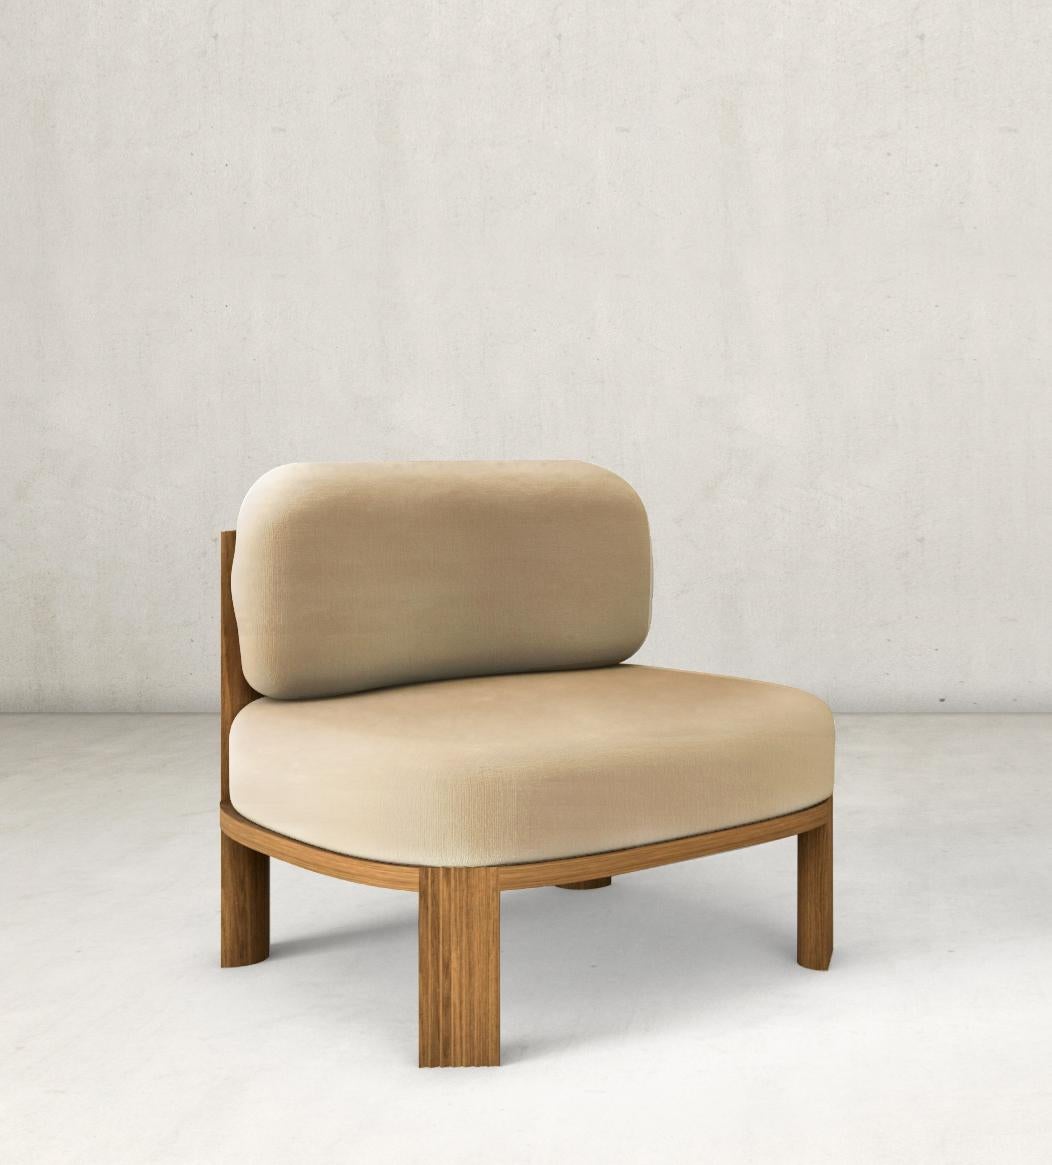 Oak armchair by Collector
Dimensions: W 75 x D 70 x H 77 cm
Materials: Fabric, oak wood 
Other materials available

The Collector brand aims to be part of the daily life by fusing furniture to our home routine and lifestyle, that’s why we’ve